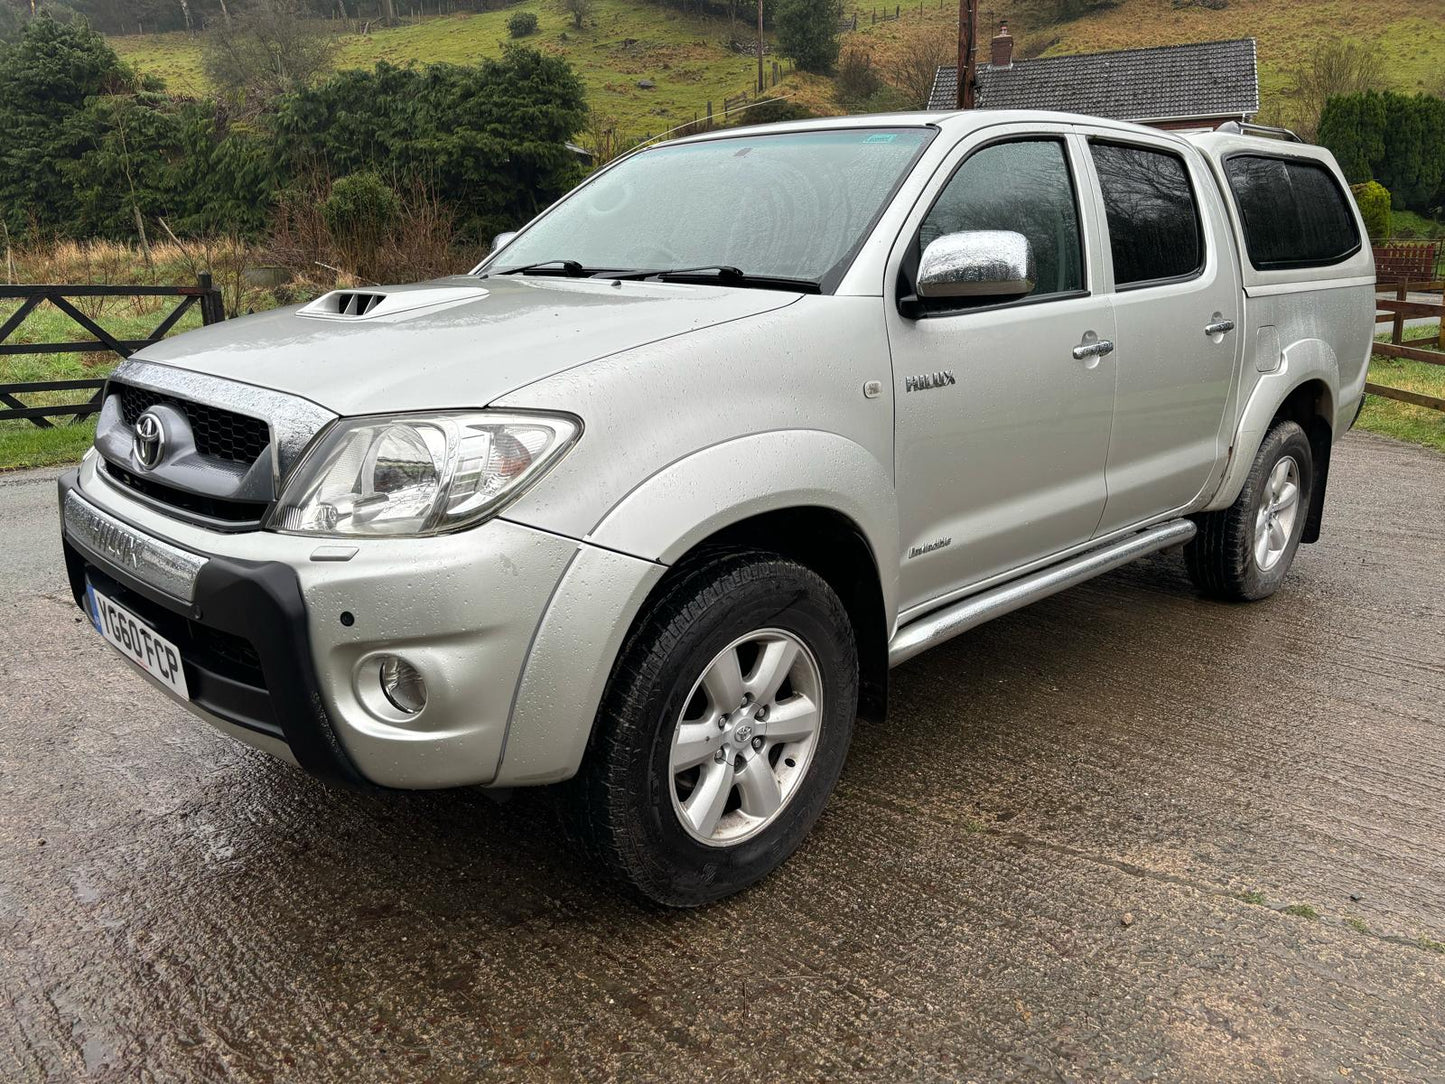 TOYOTA HILUX INVINCIBLE PICKUP TRUCK 3.0 MANUAL IN THE FAMOUS CHAMPAGNE GOLD